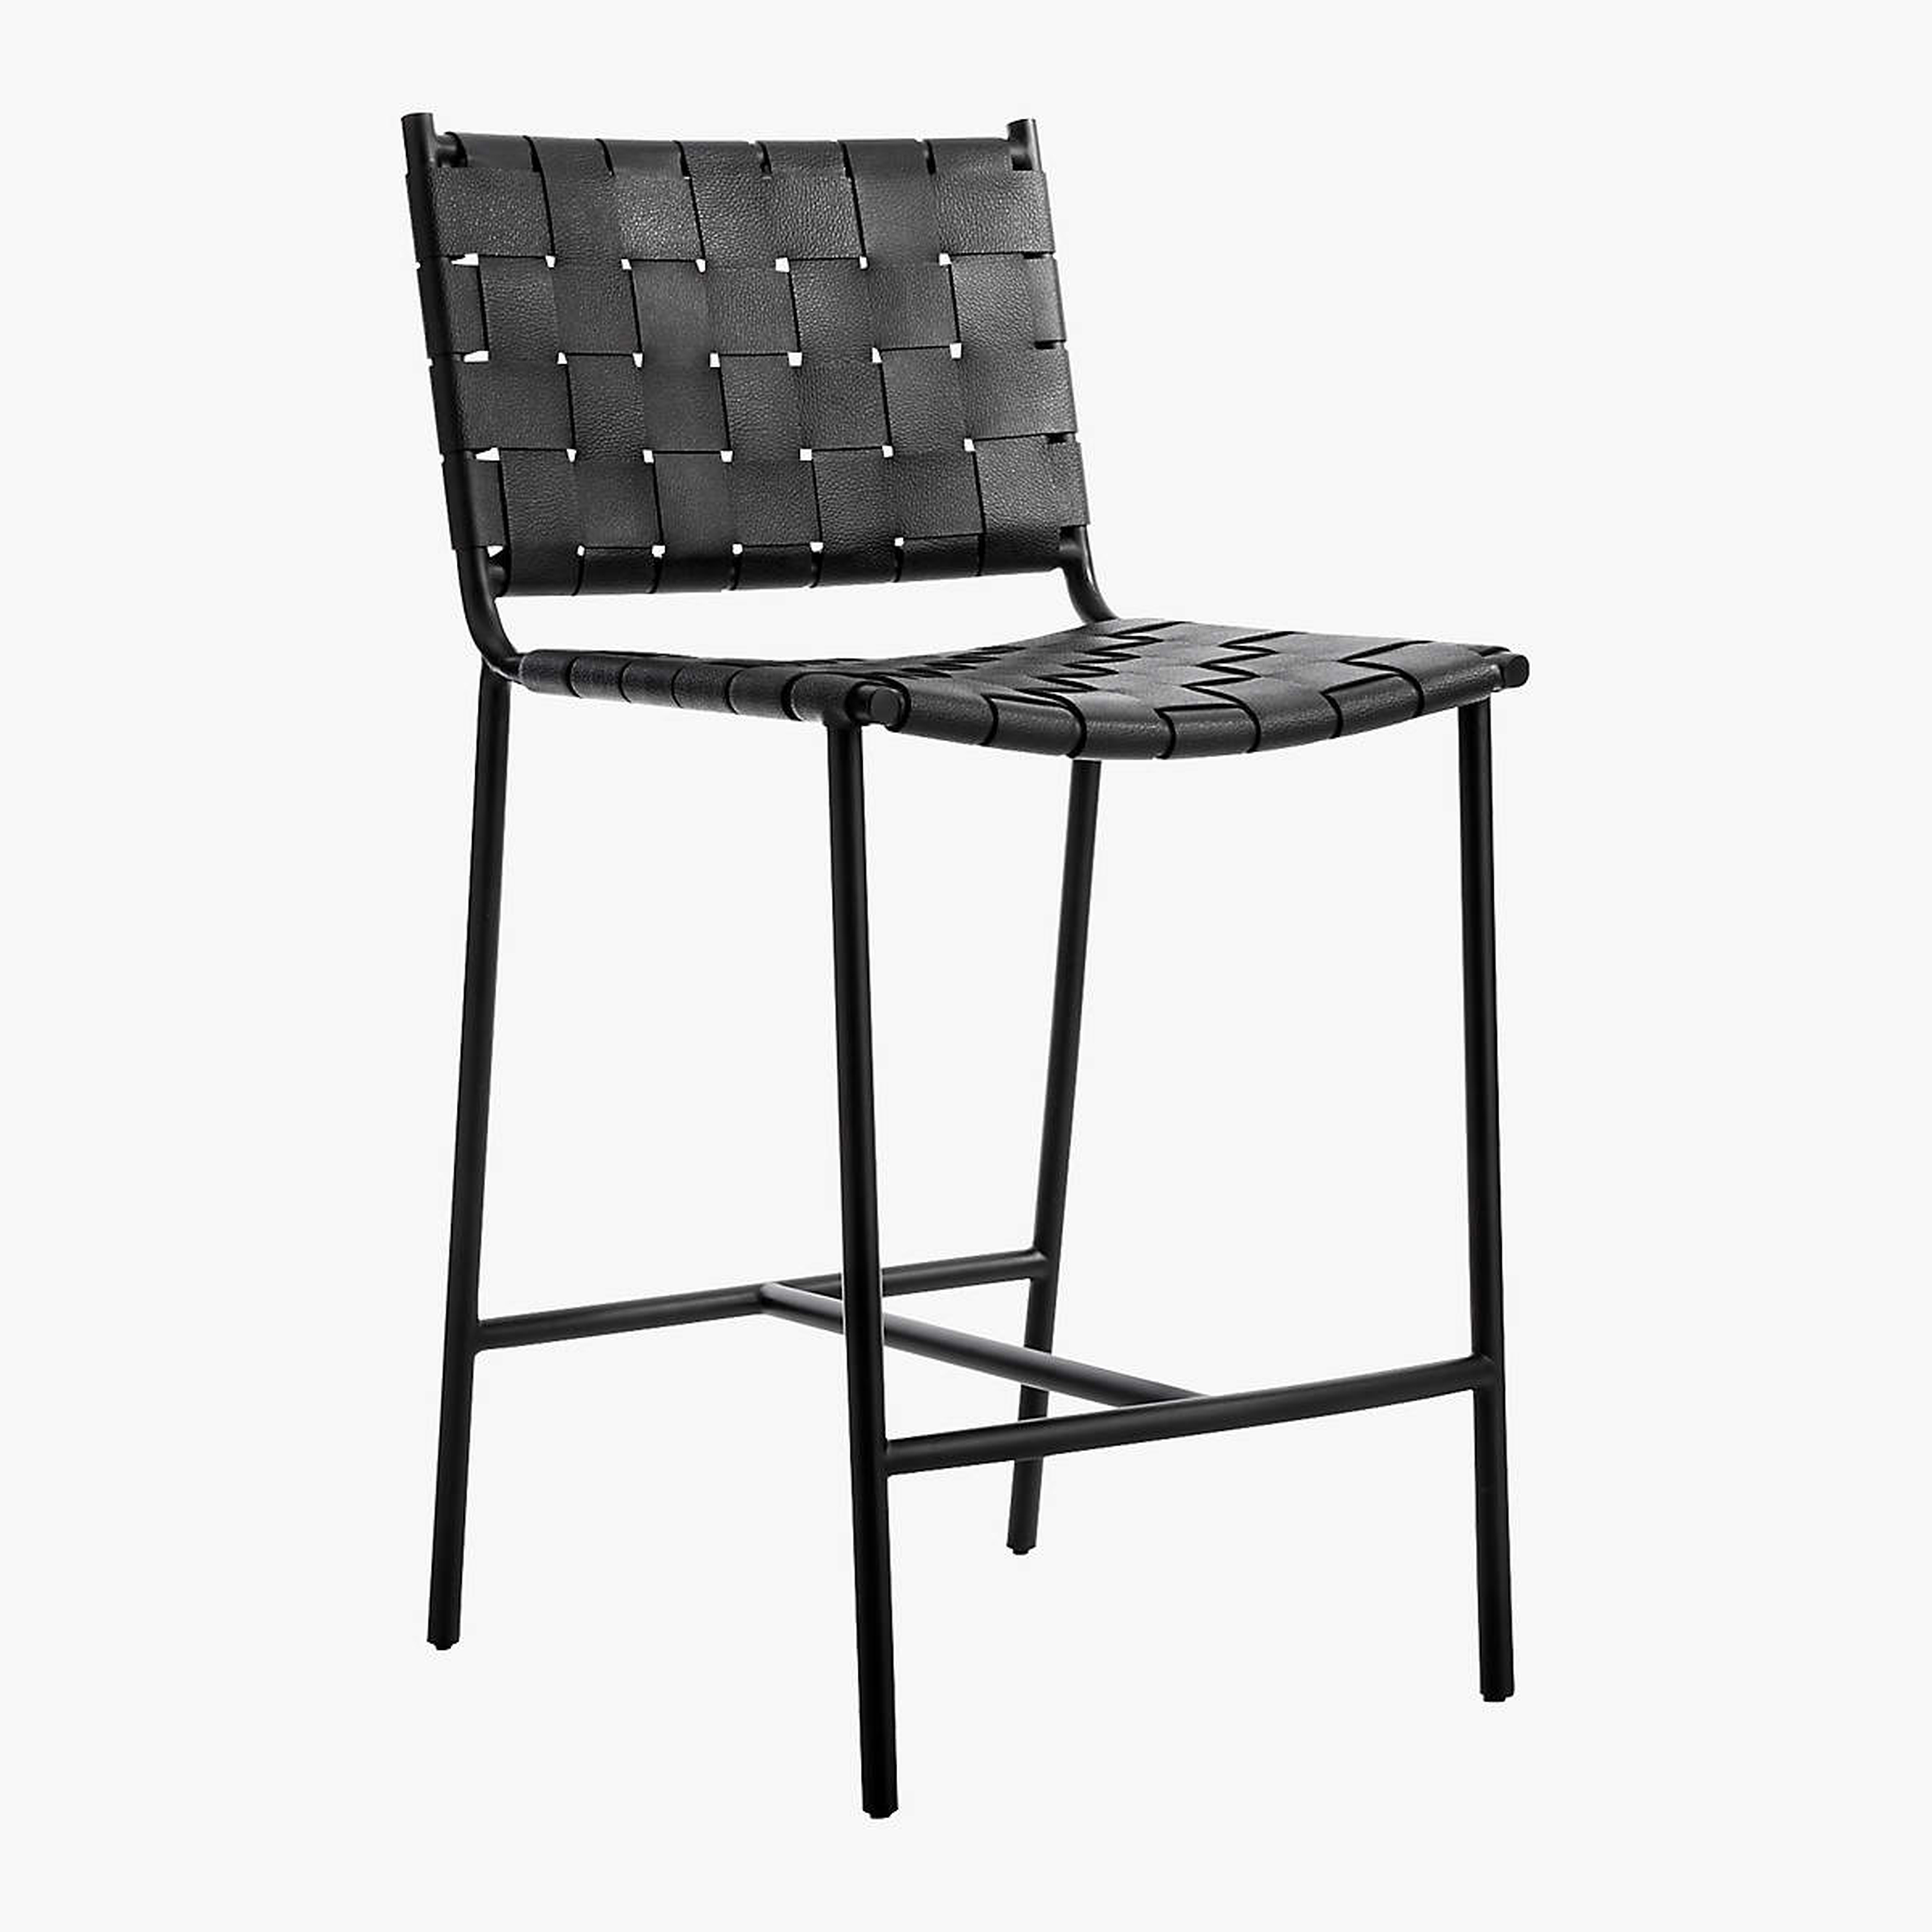 Woven Black Leather Counter Stool - CB2